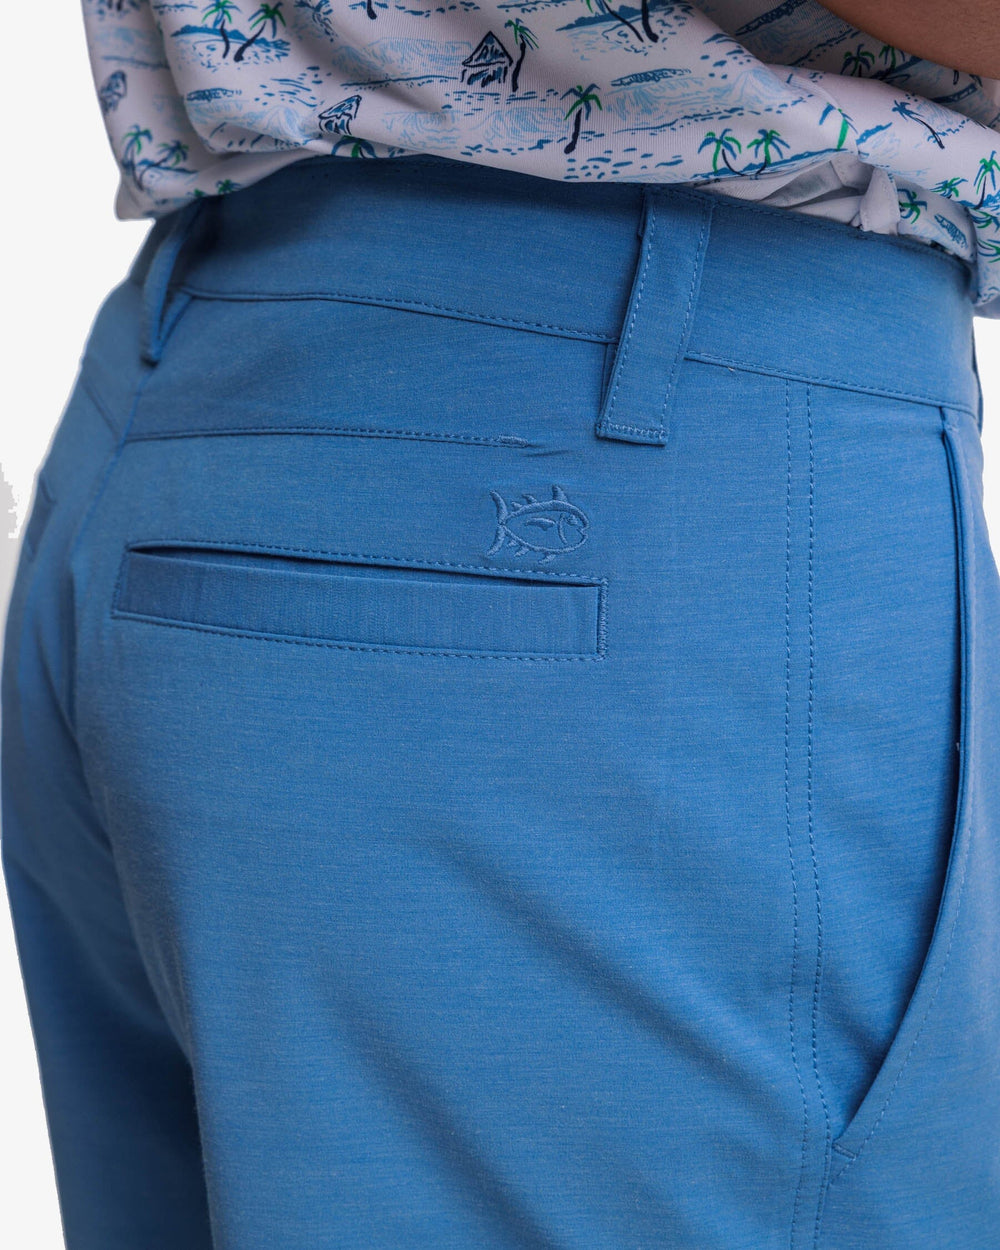 The detail view of the Southern Tide Heathered T3 Gulf 9 Inch Performance Short by Southern Tide - Heather Atlantic Blue